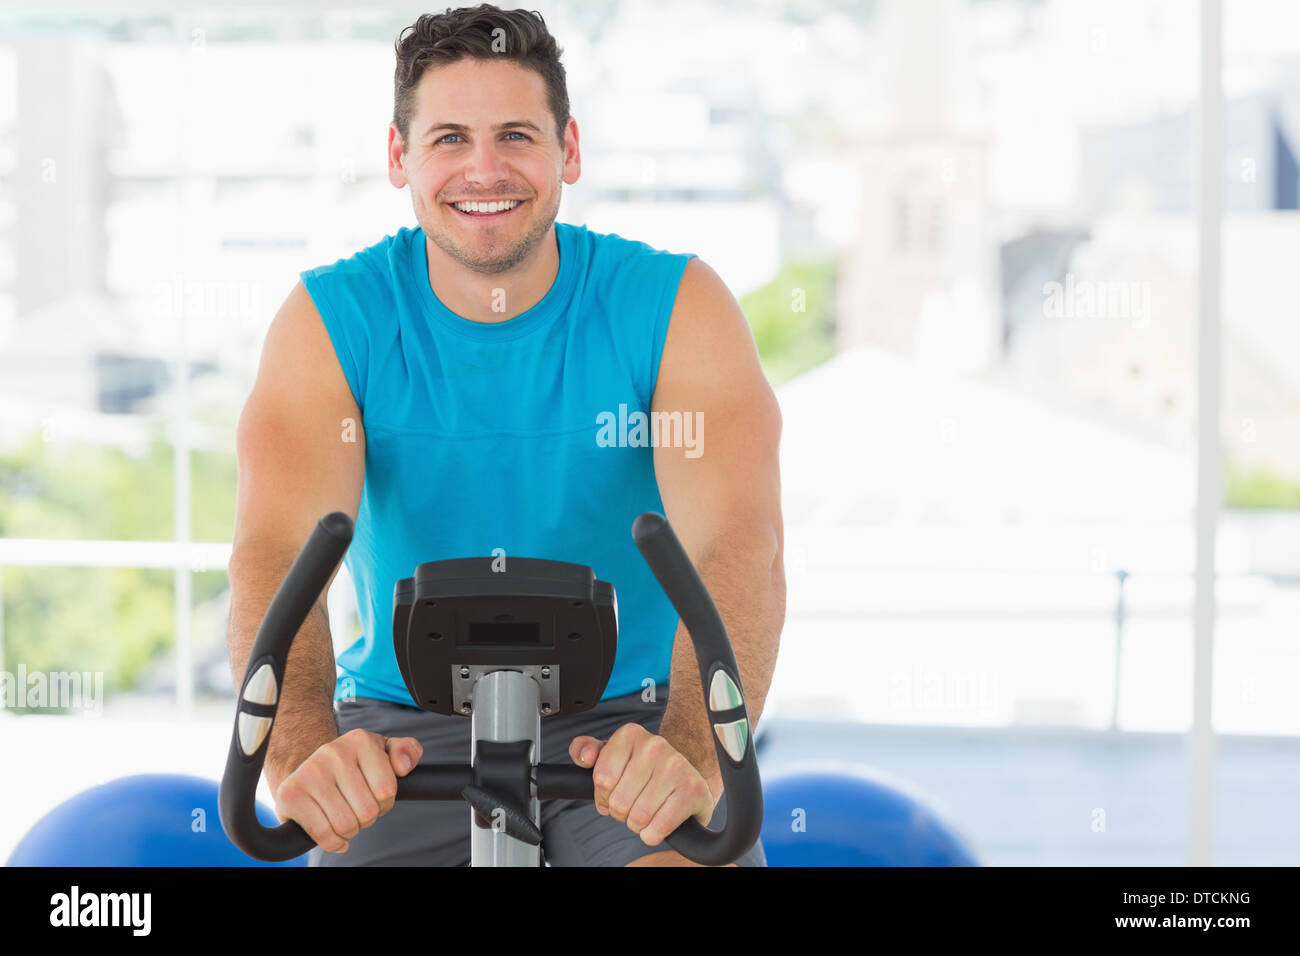 Smiling young man working out at spinning class Stock Photo